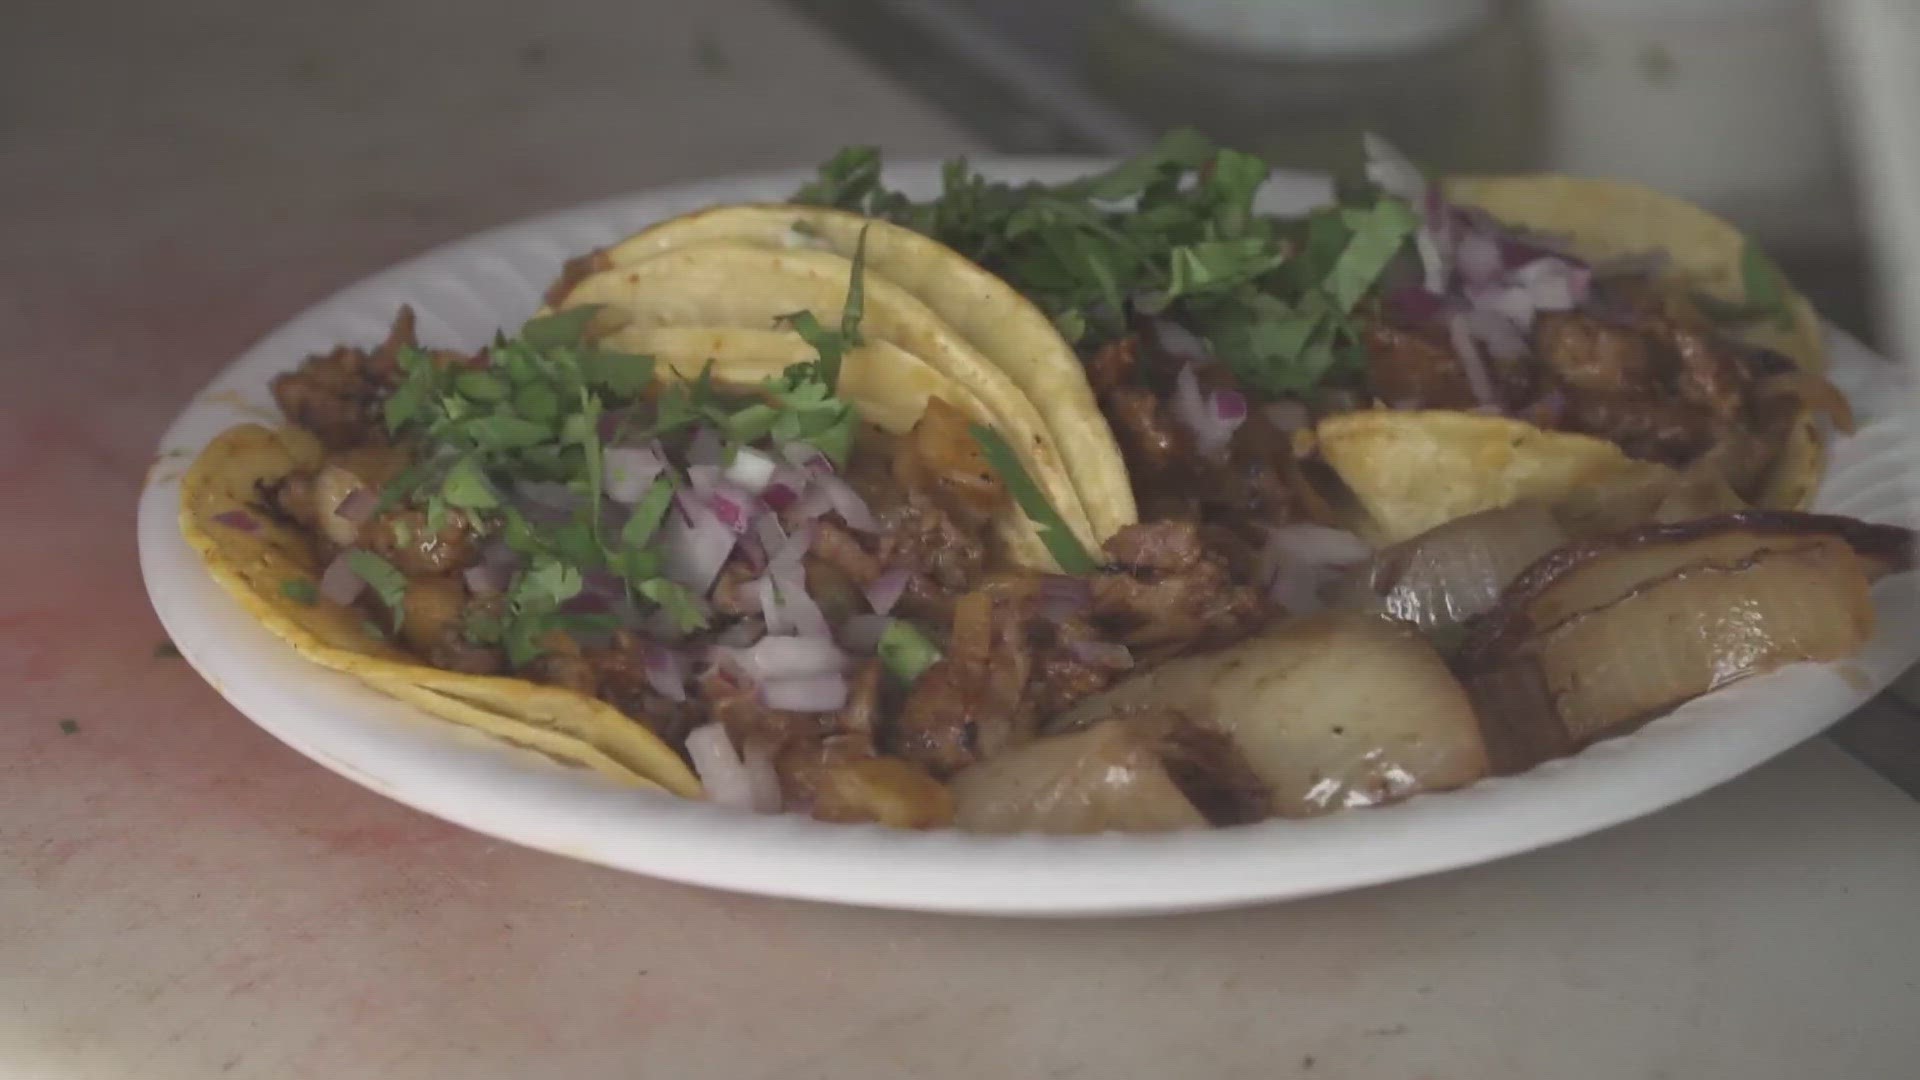 A Taco Plaza is coming to Sacramento | Race and Culture